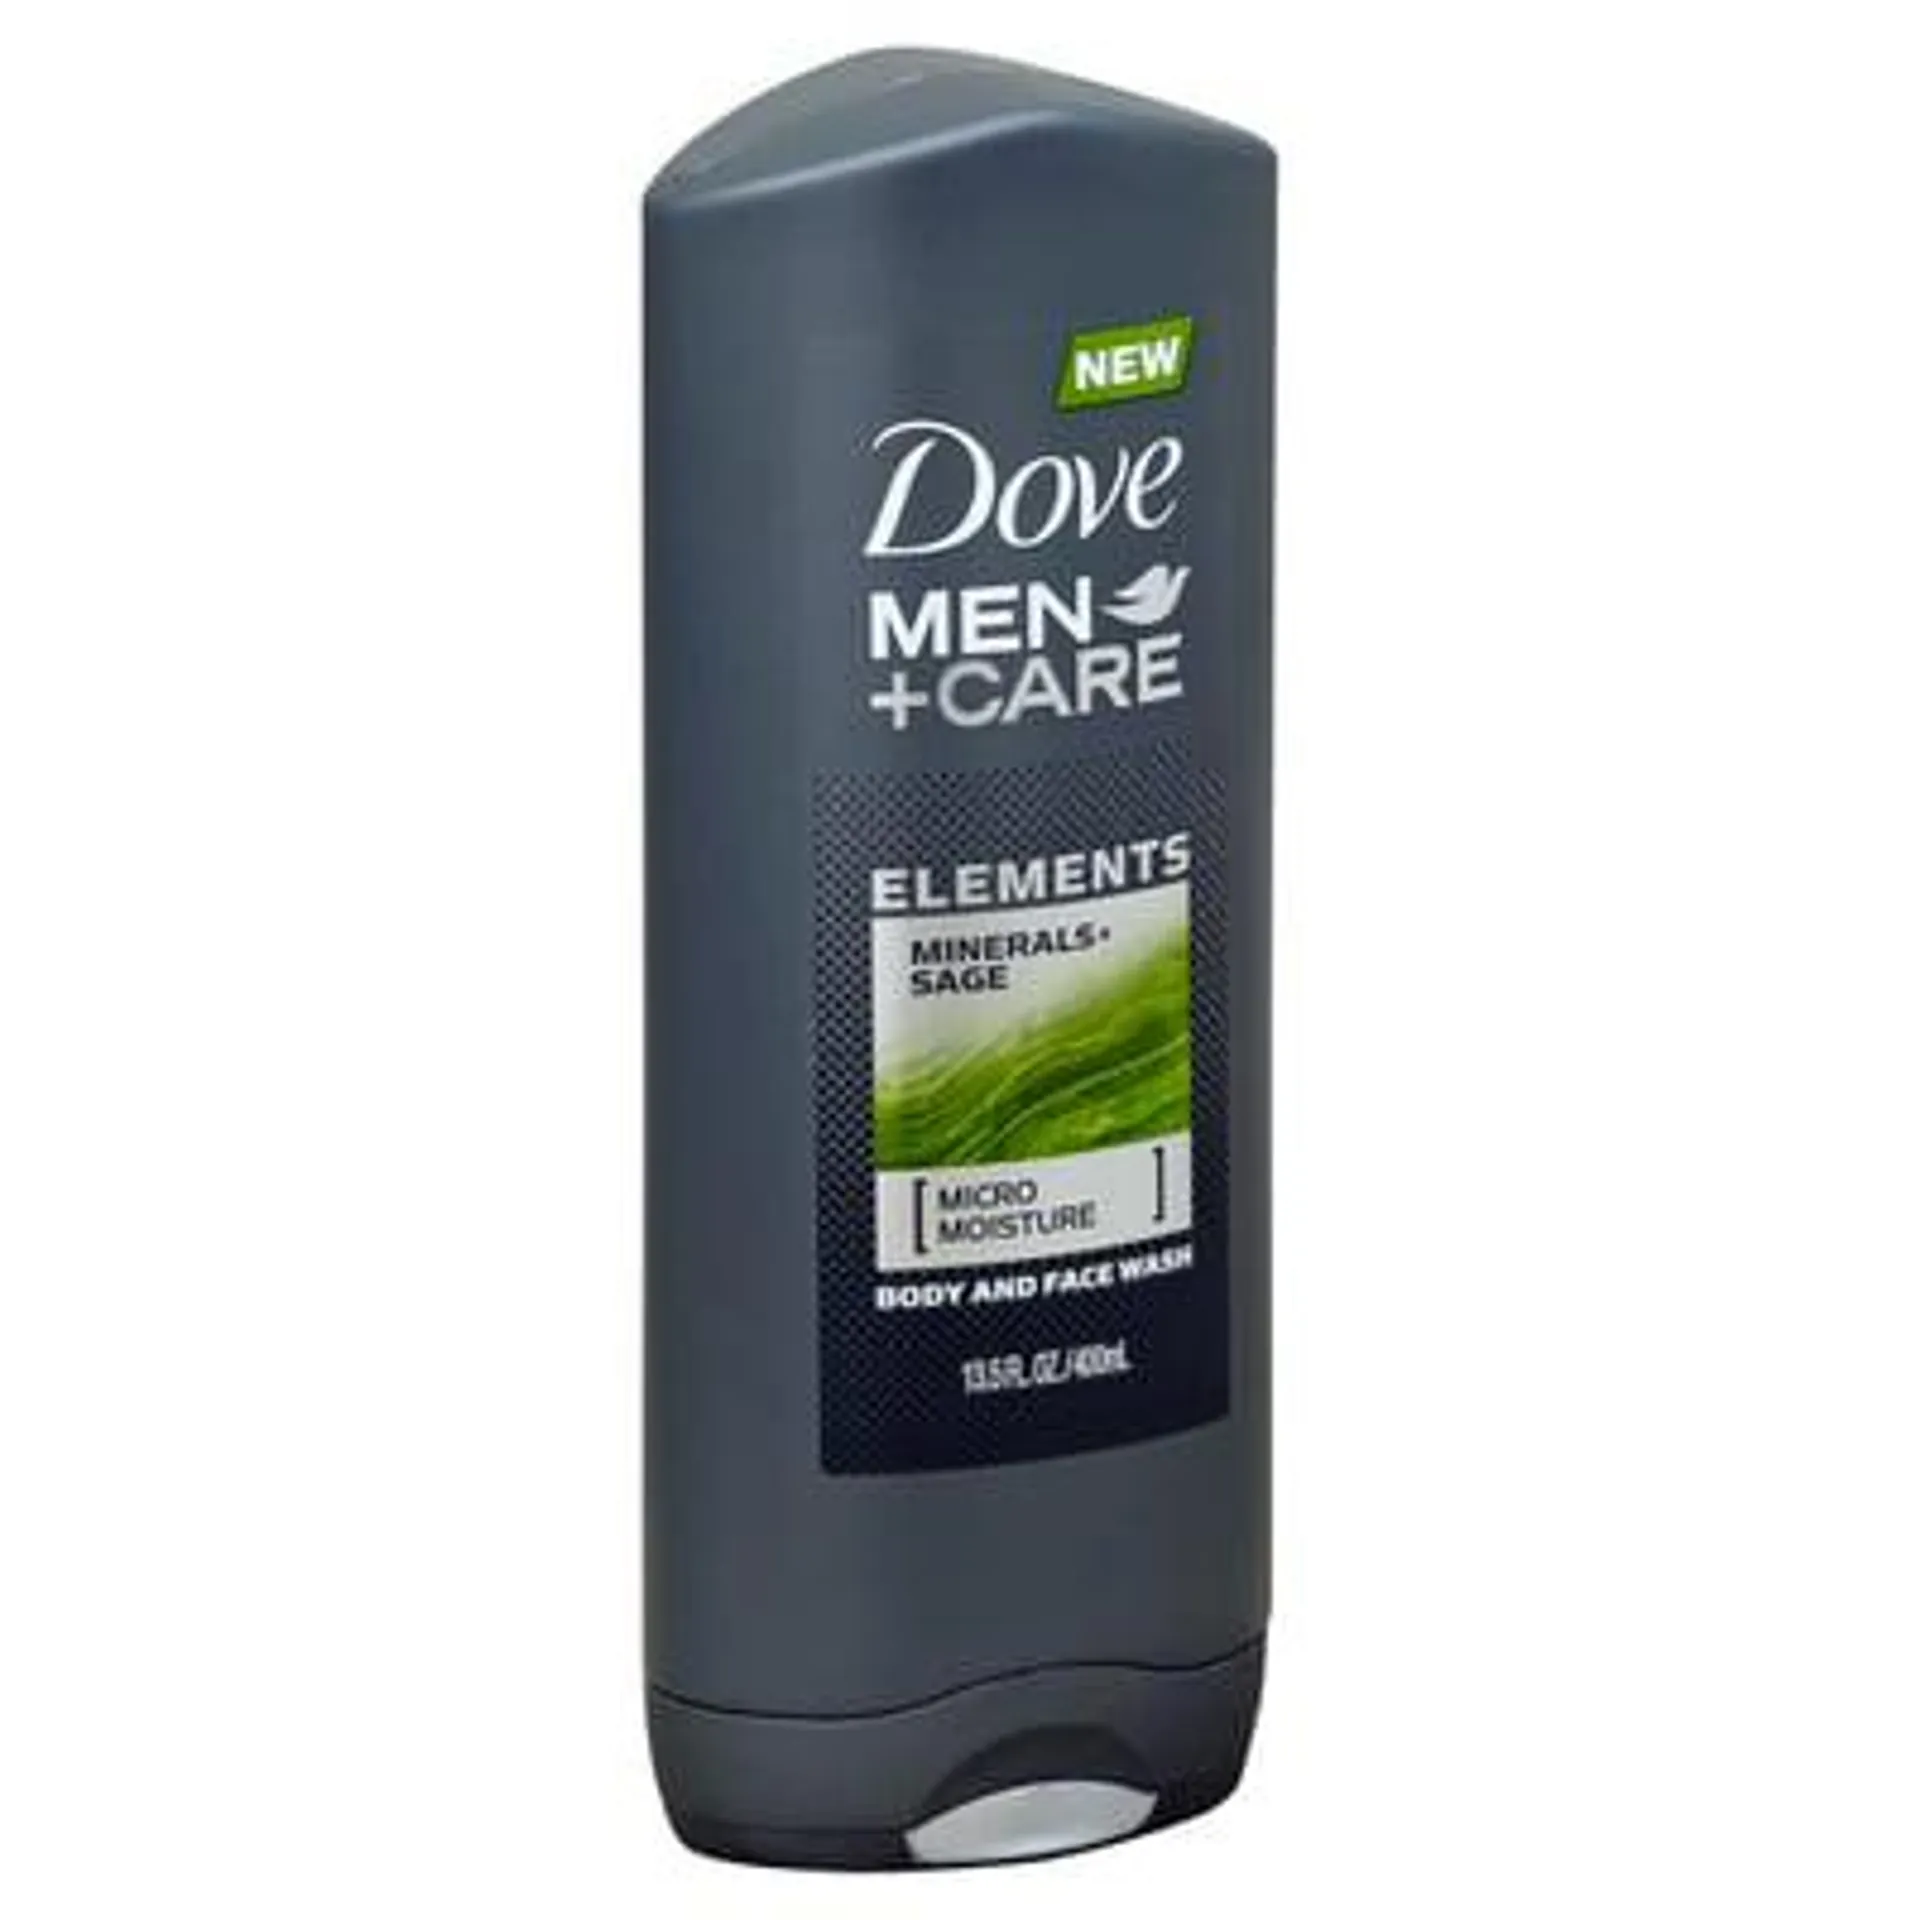 Dove, Men + Care - Body and Face Wash, Elements, Minerals + Sage